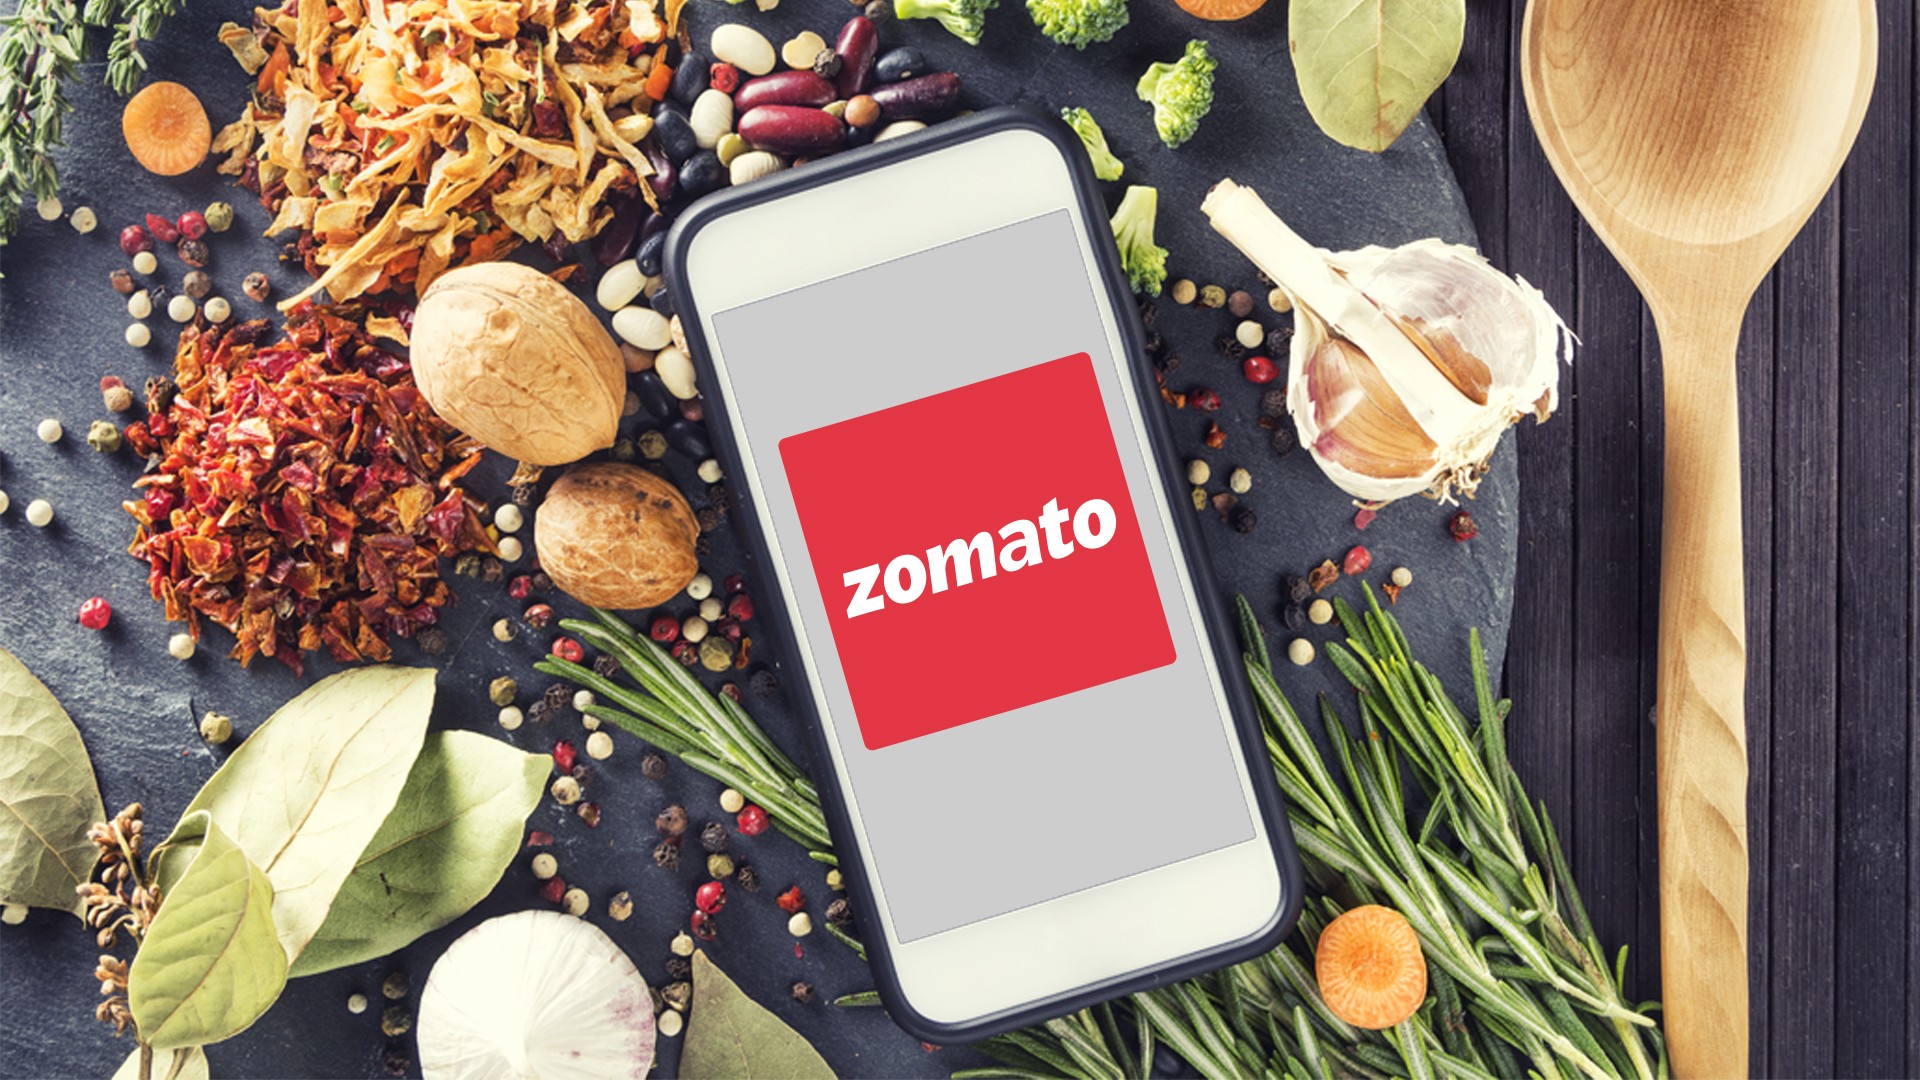 Rs 8250 Cr Expected To Be Raised in Zomato IPO On July 19 At Rs 70 Price Band?